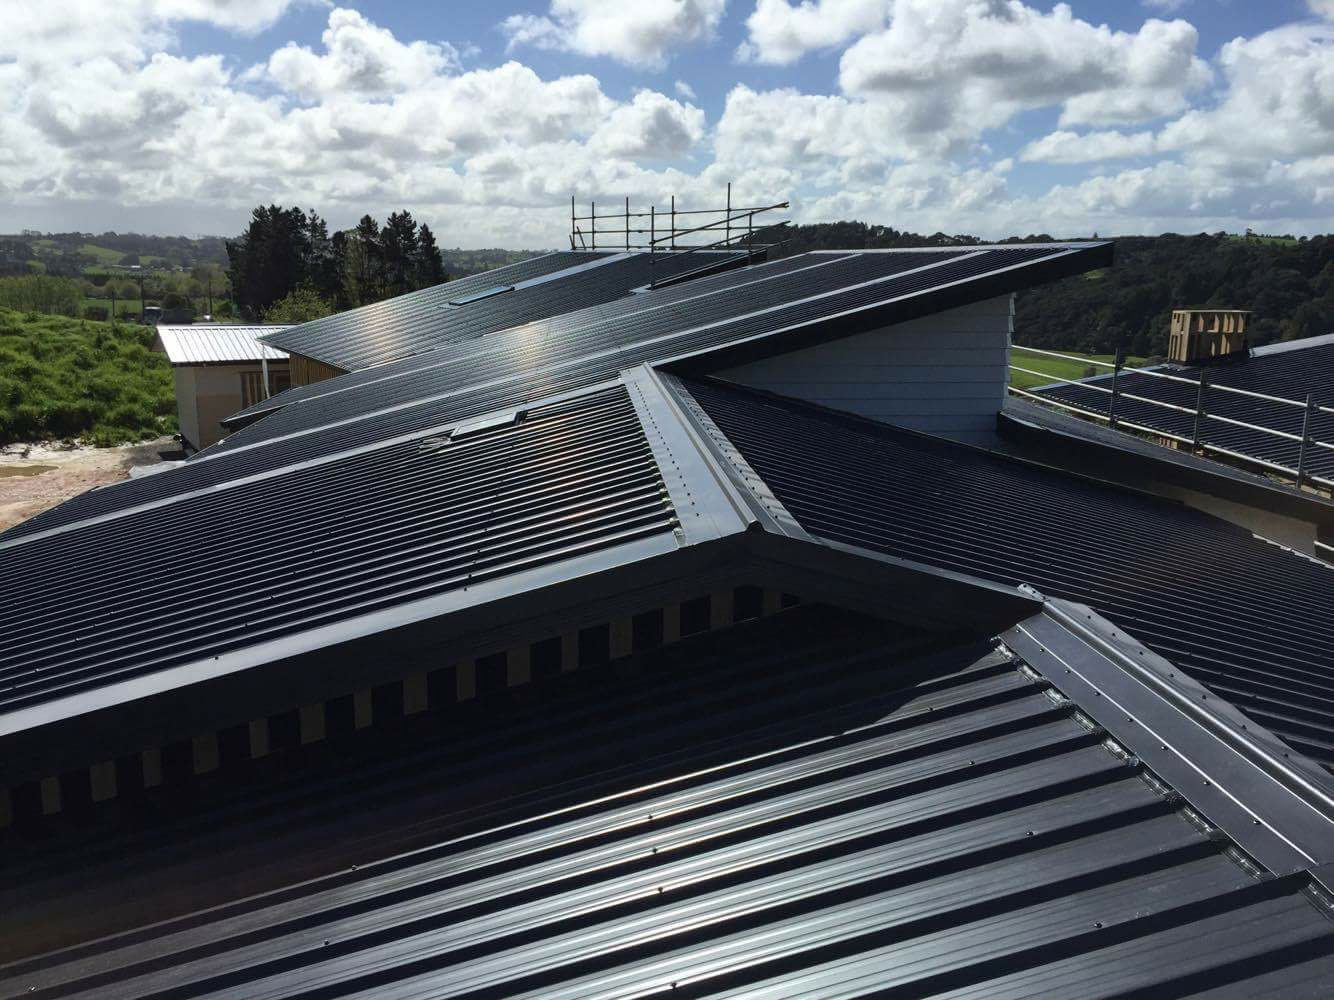 auckland roofing solutions services auckland and new zealand wide new roofs repair cladding and more Project gallery 71